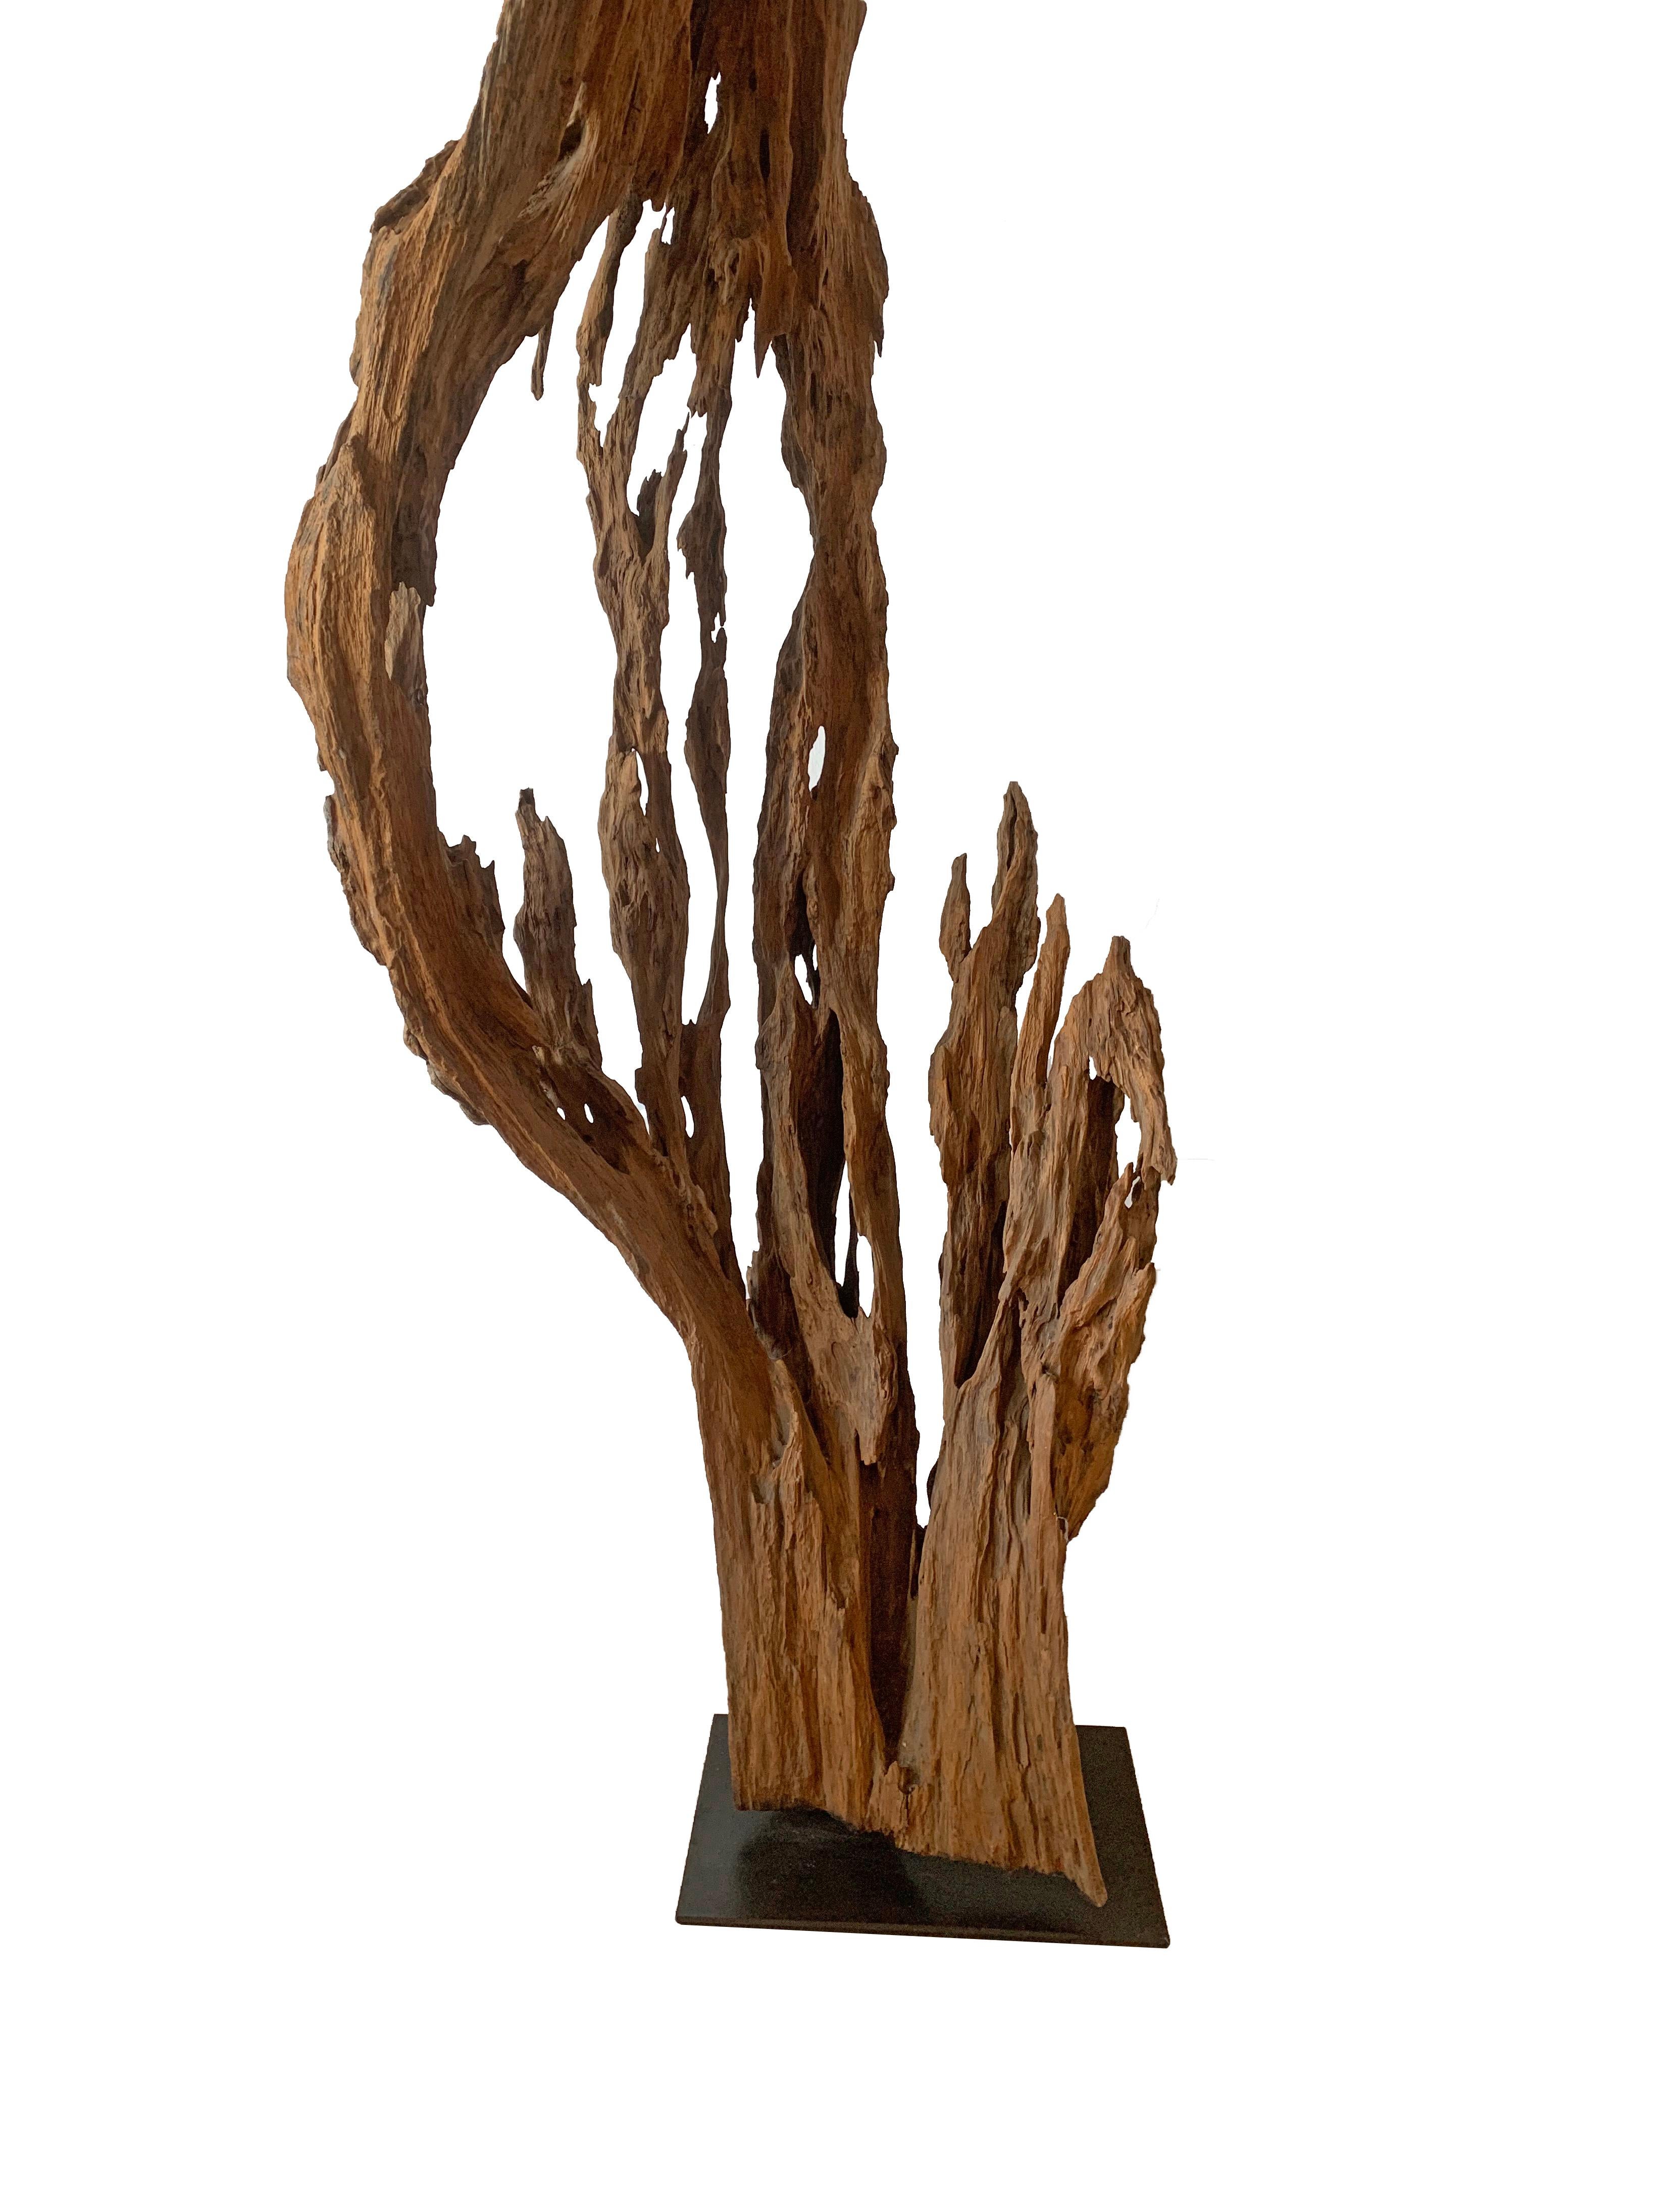 Other Eroded Teak Tree Skeleton Sculpture on Stand, Late 20th Century For Sale